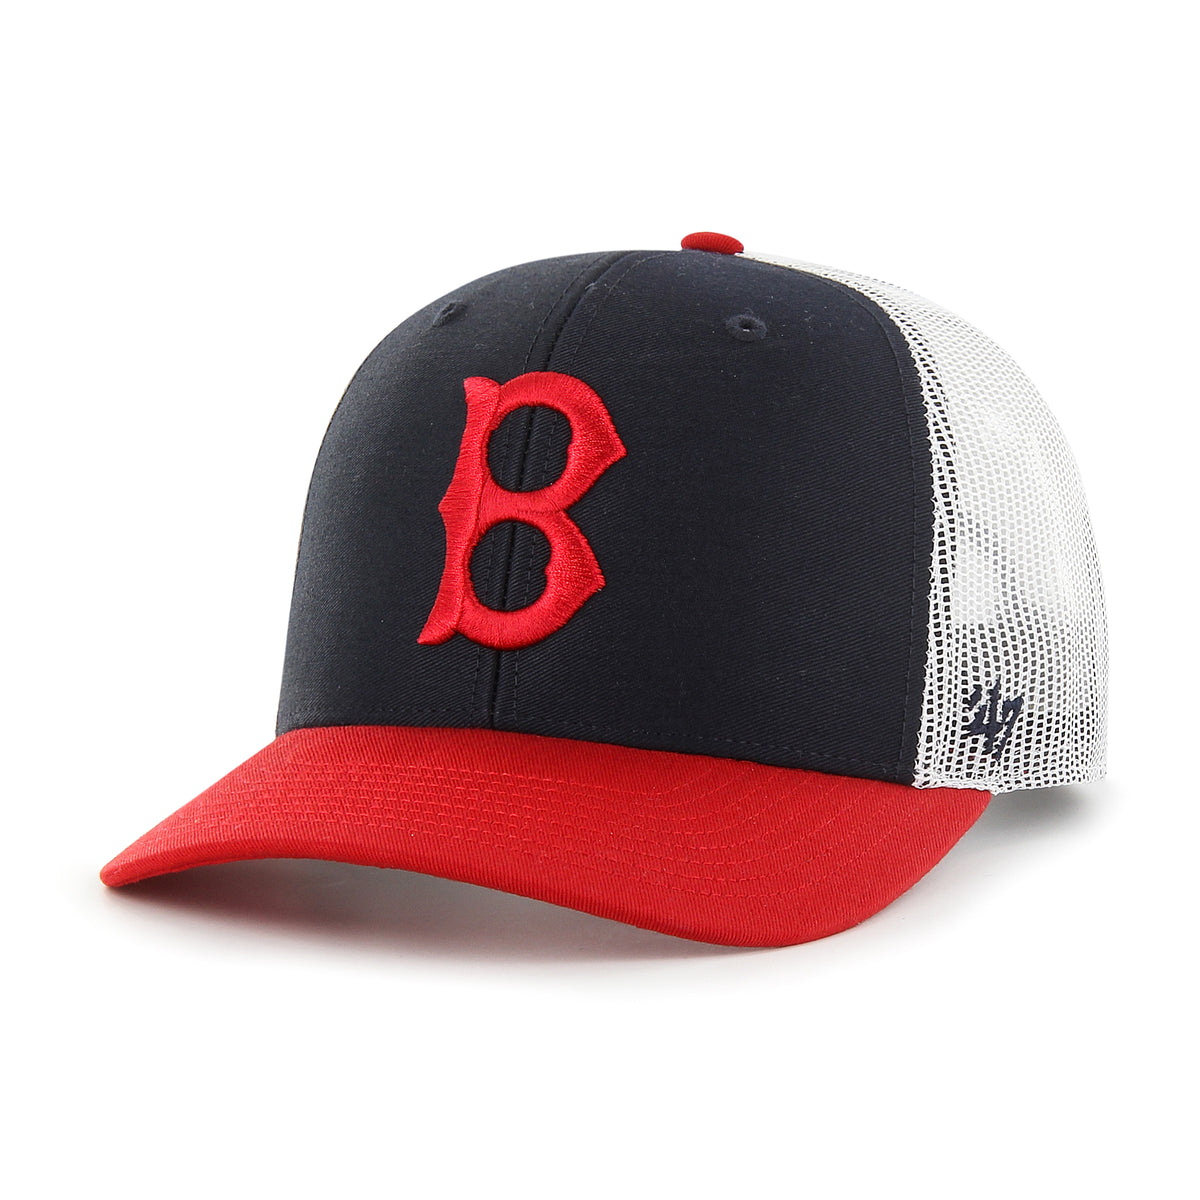 BOSTON RED SOX COOPERSTOWN SIDE NOTE '47 TRUCKER